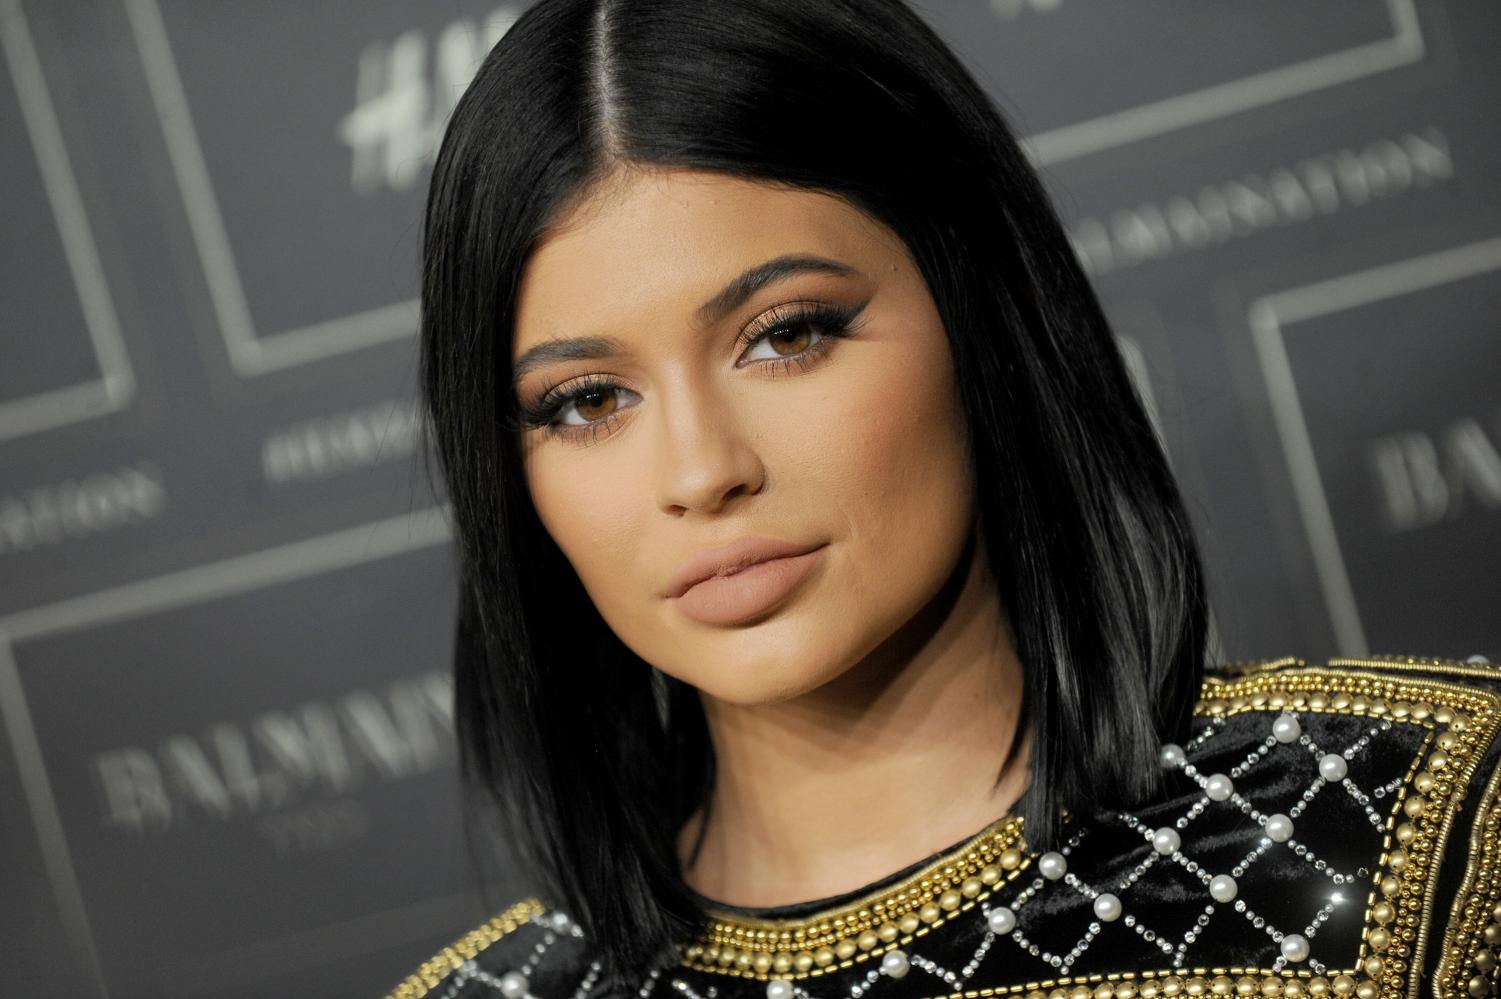 Point/Counterpoint: Is Kylie Jenner self-made? – The Daily Iowan